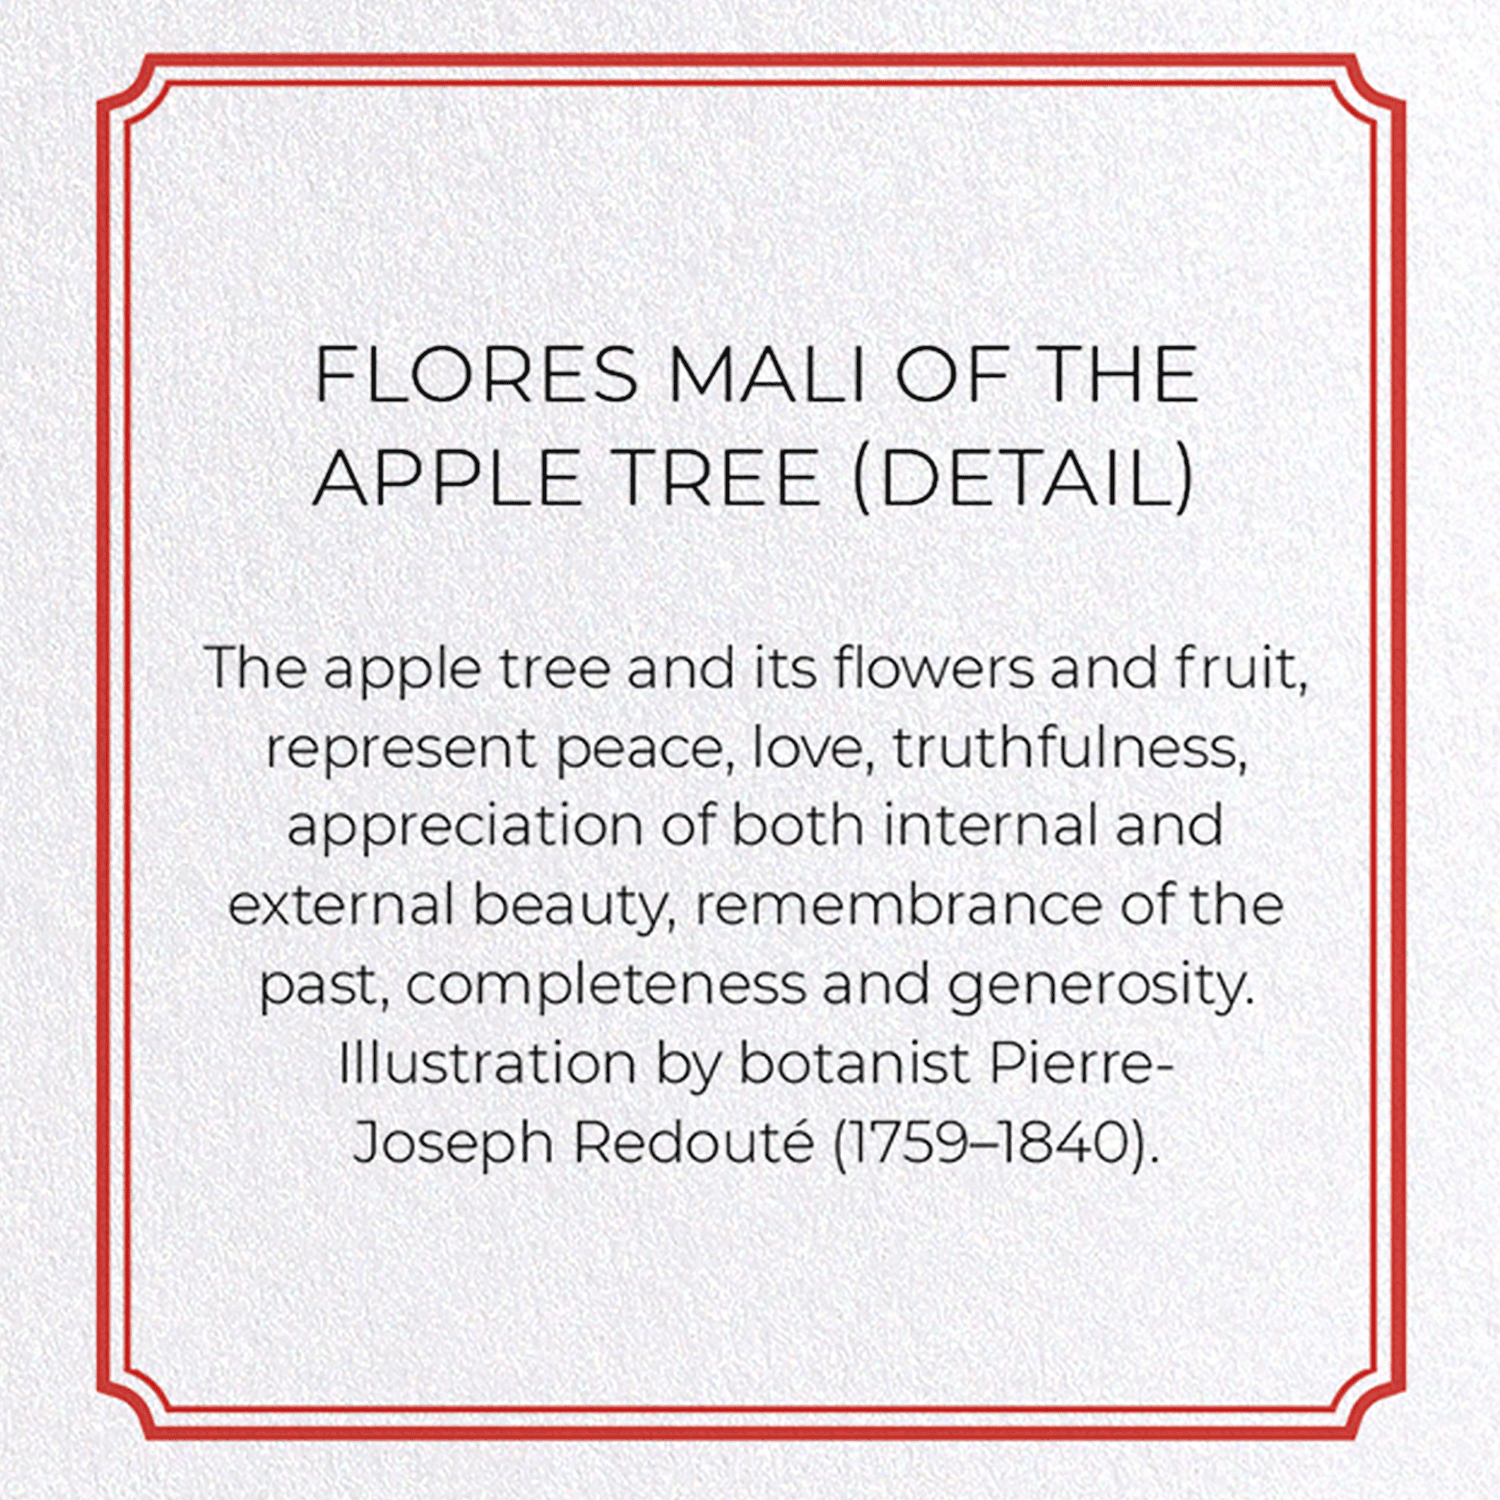 FLORES MALI OF THE APPLE TREE